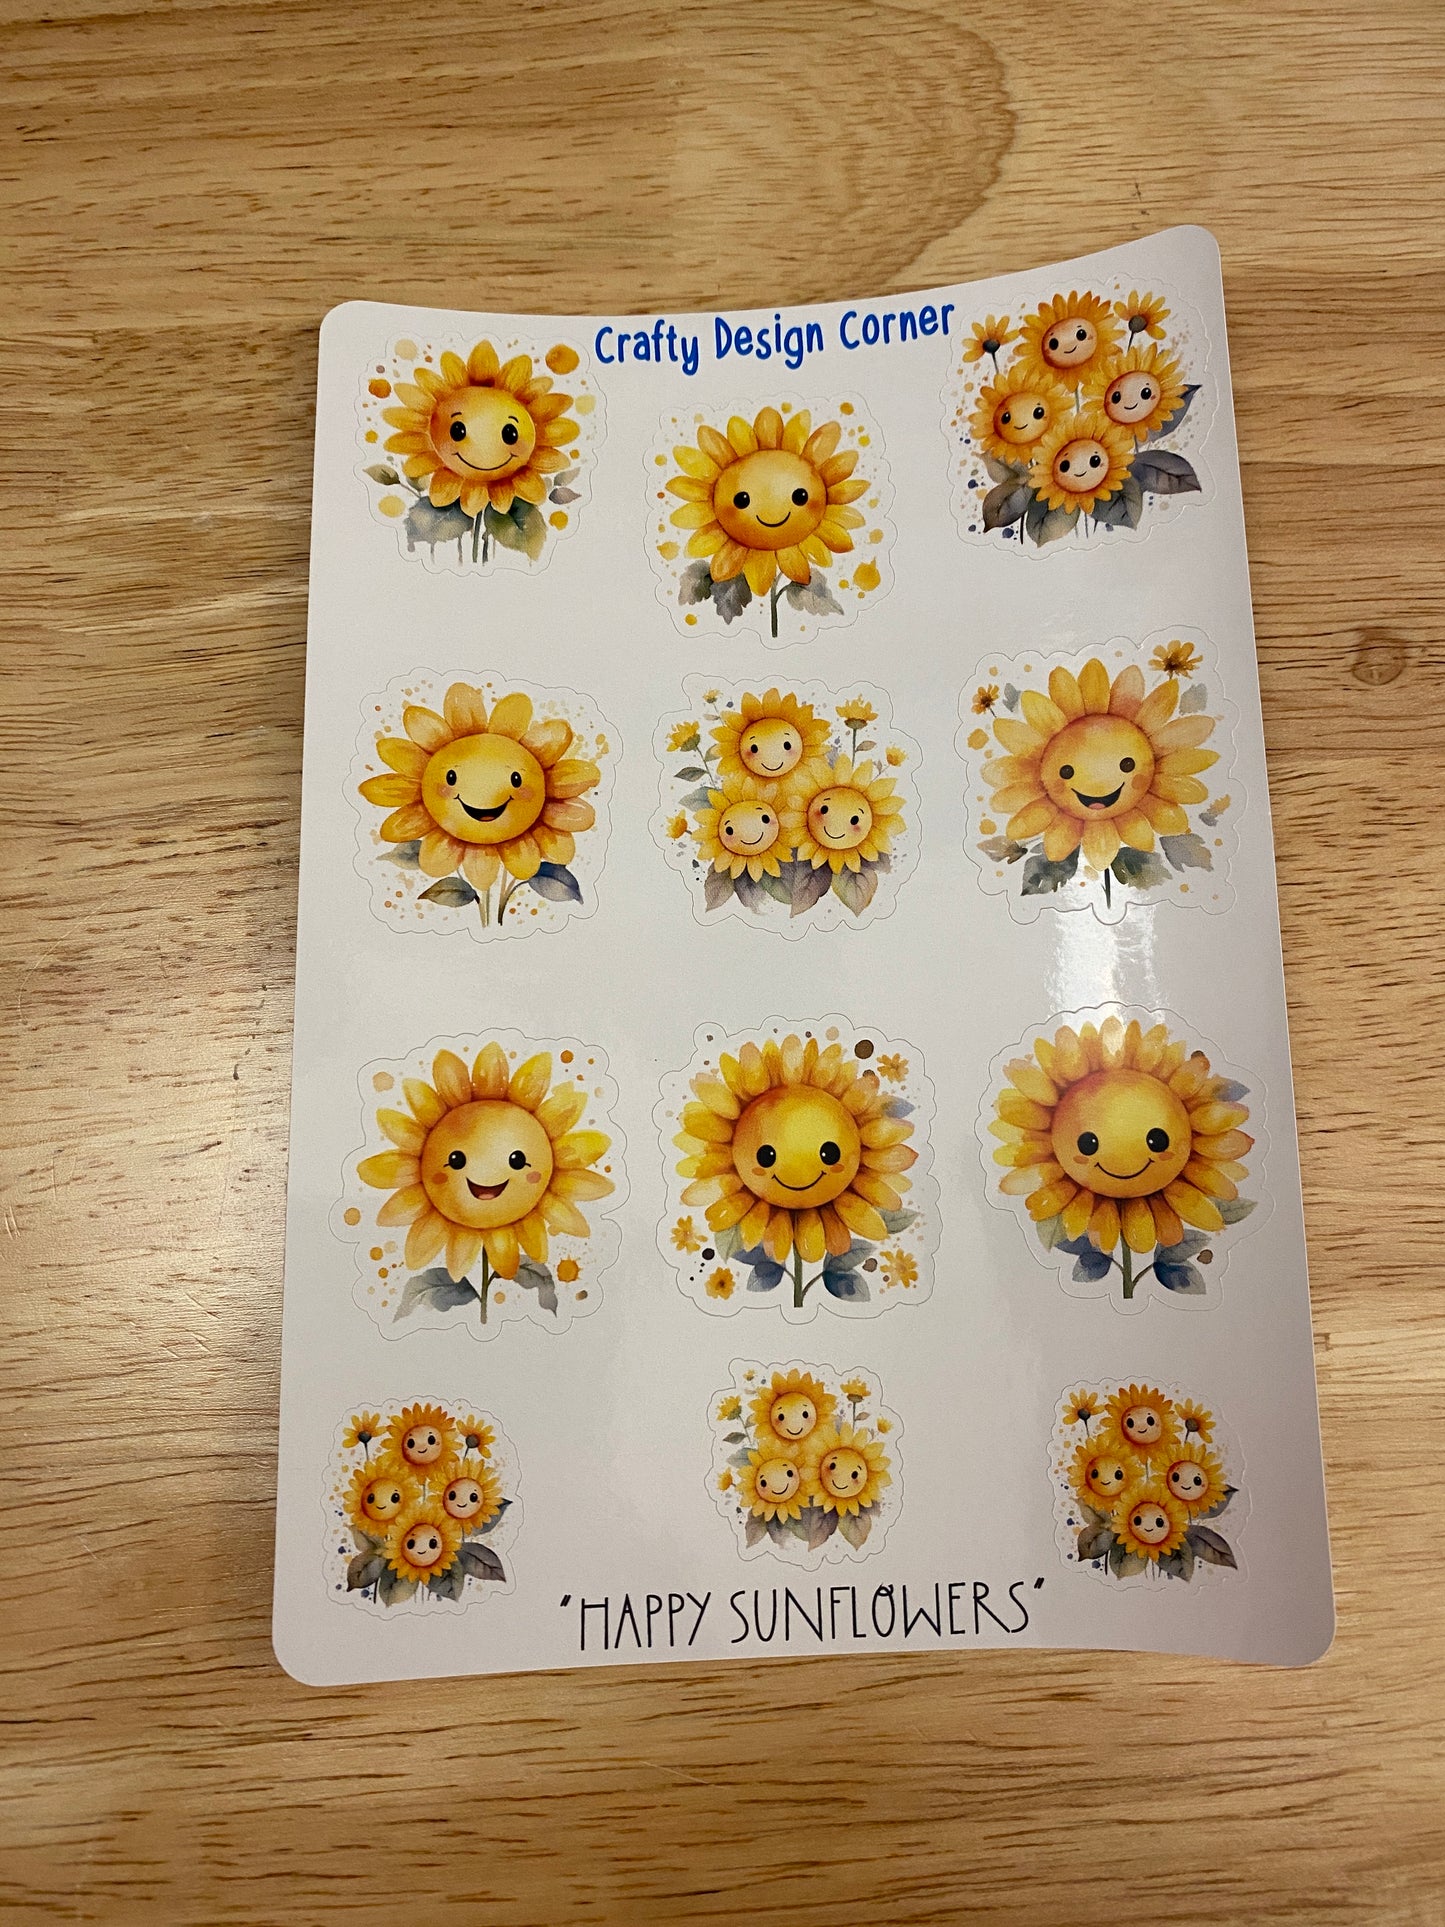 Cute Yellow Sunflowers Stickers, Sunflower with faces Sticker, Sunflower sticker sheet